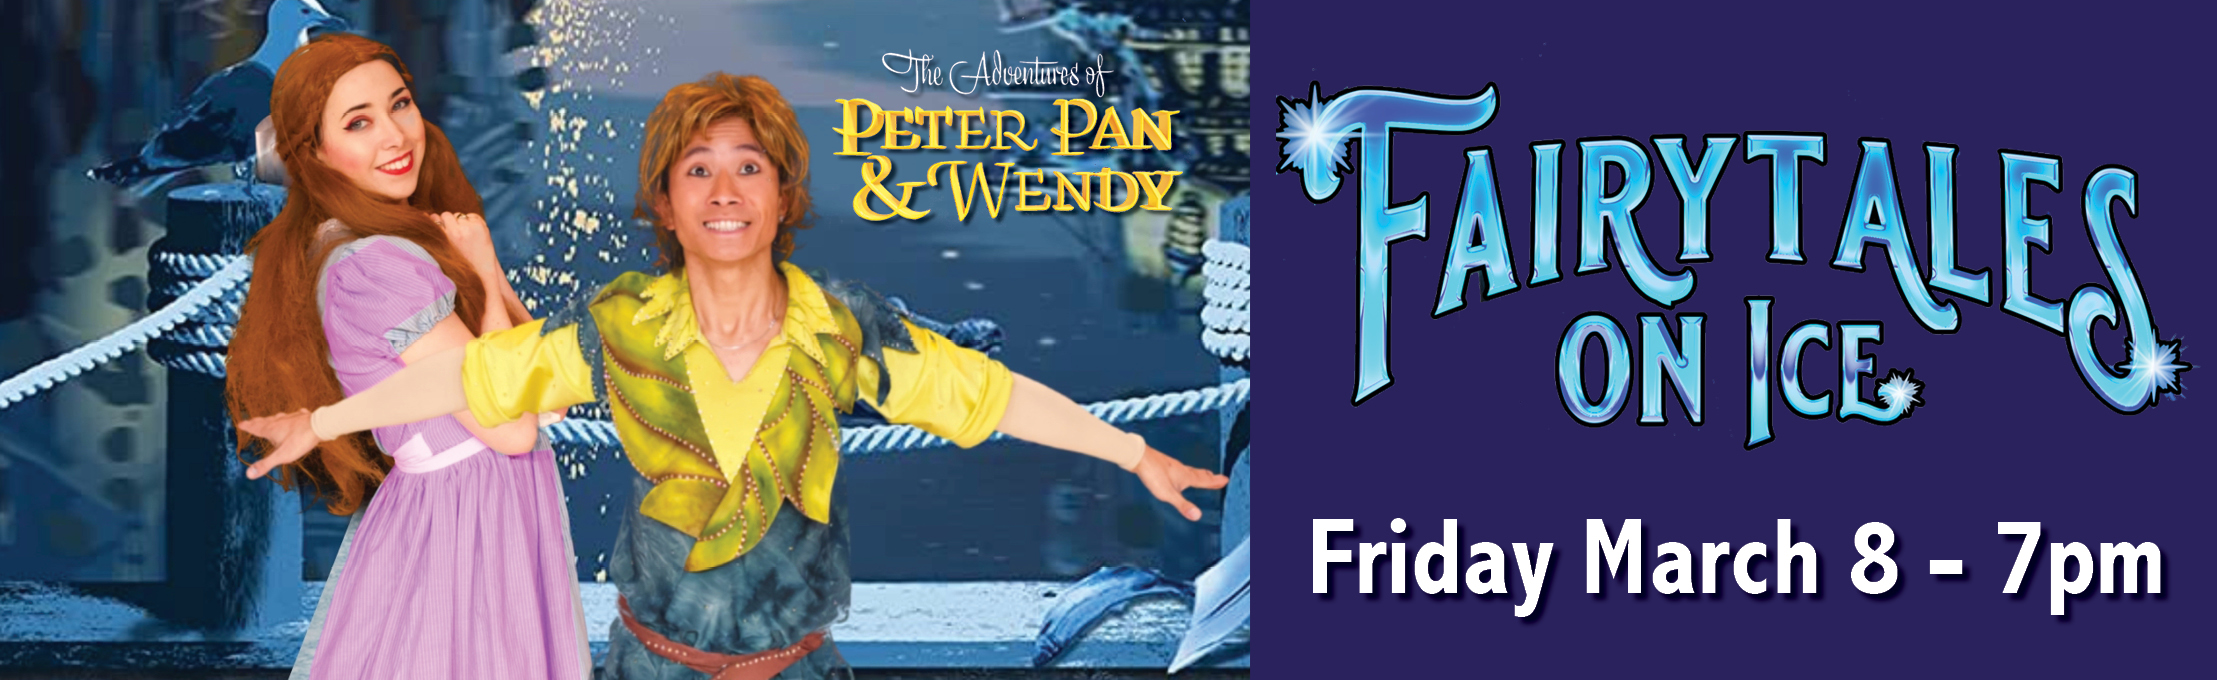 Fairytales On Ice National Tour Presents Peter Pan & Wendy's Adventures